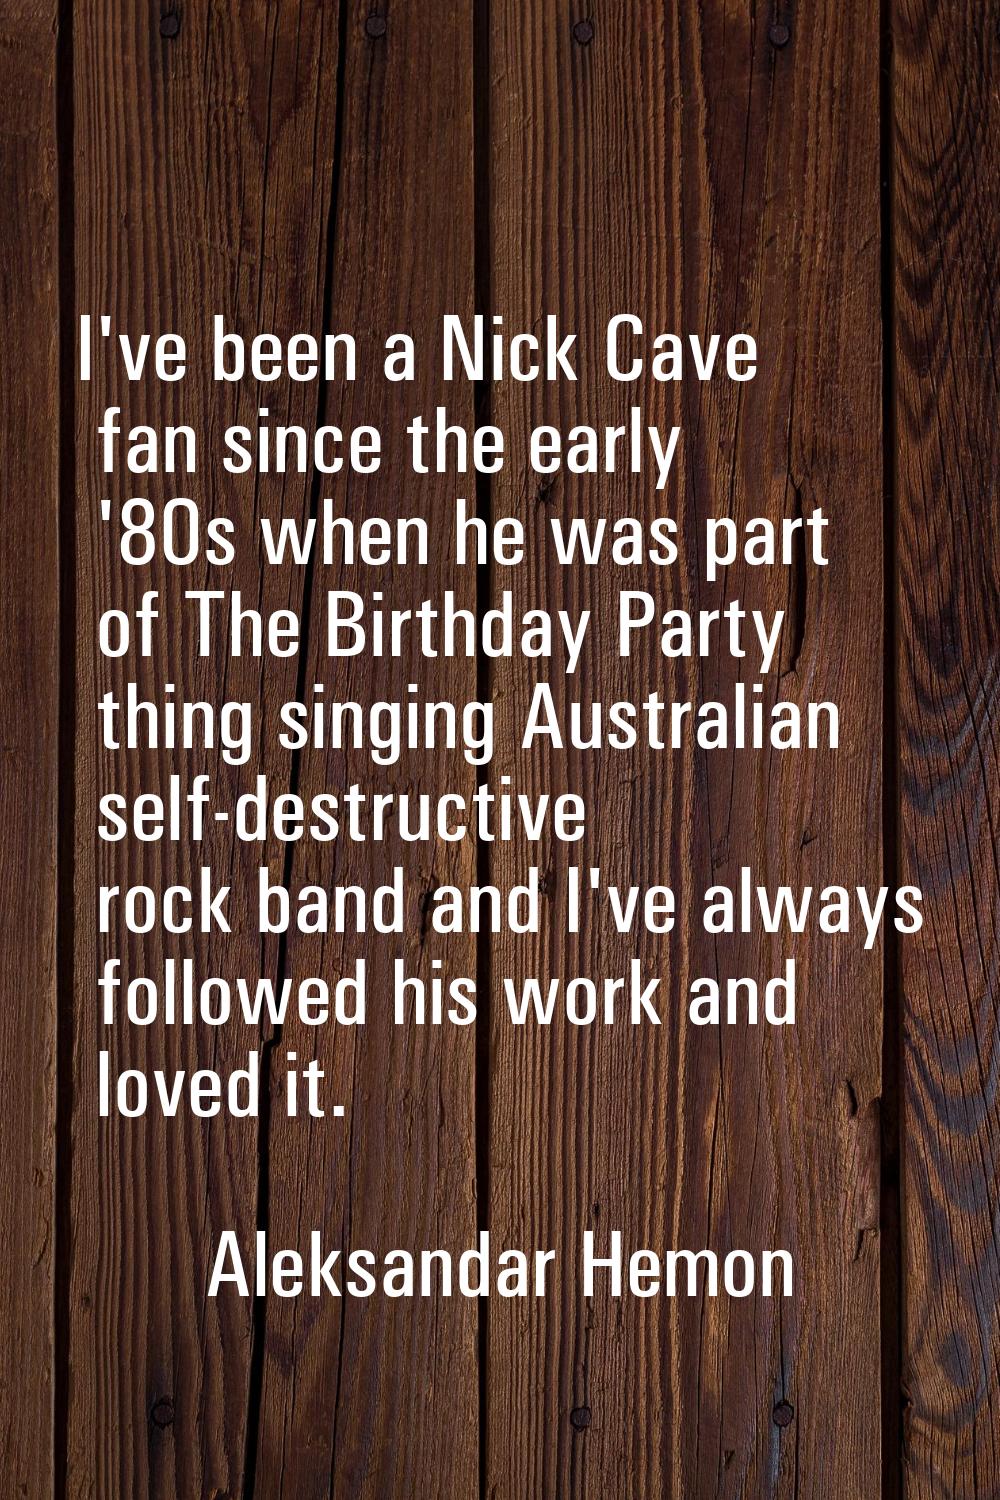 I've been a Nick Cave fan since the early '80s when he was part of The Birthday Party thing singing